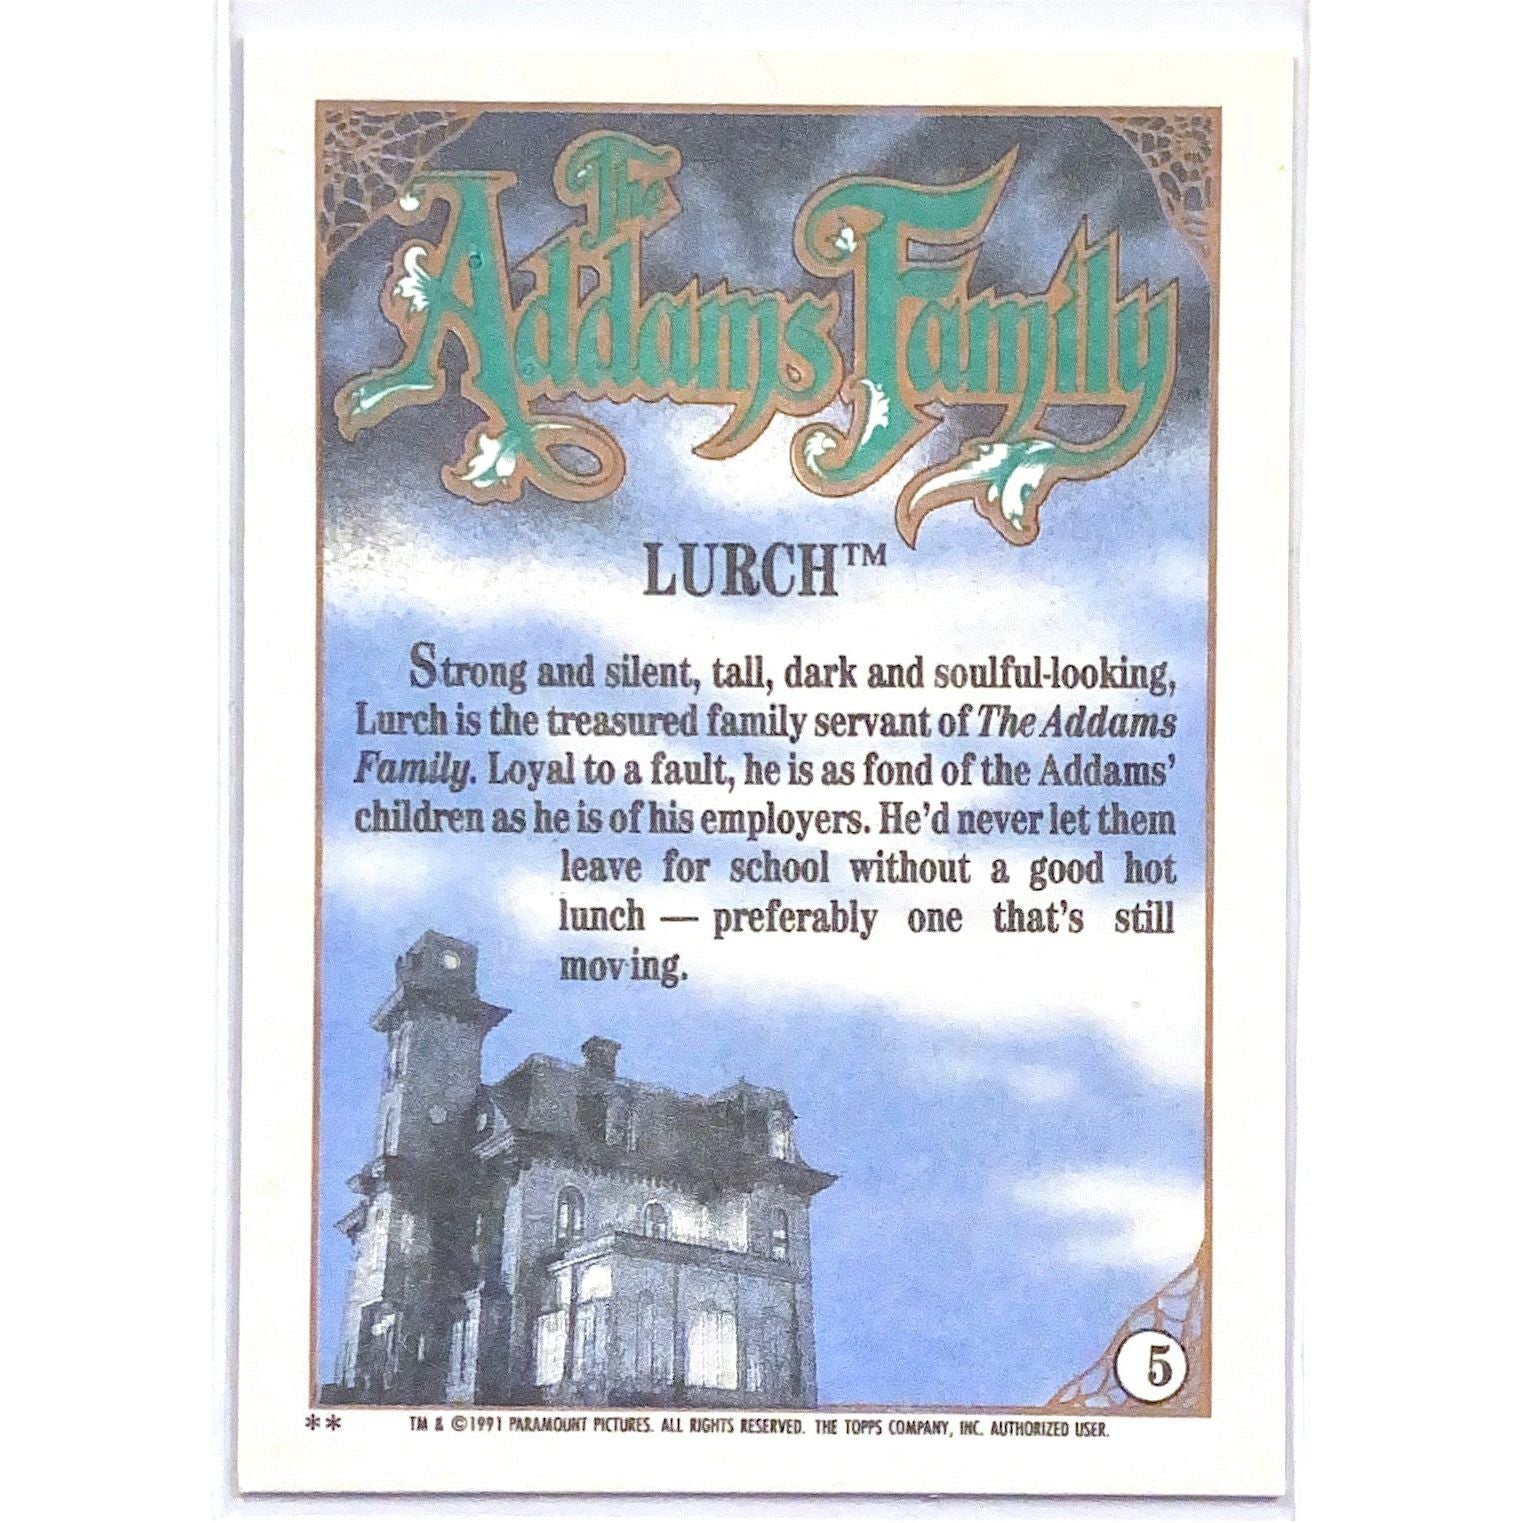  1991 Paramount Pictures The Adams Family Lurch #5  Local Legends Cards & Collectibles